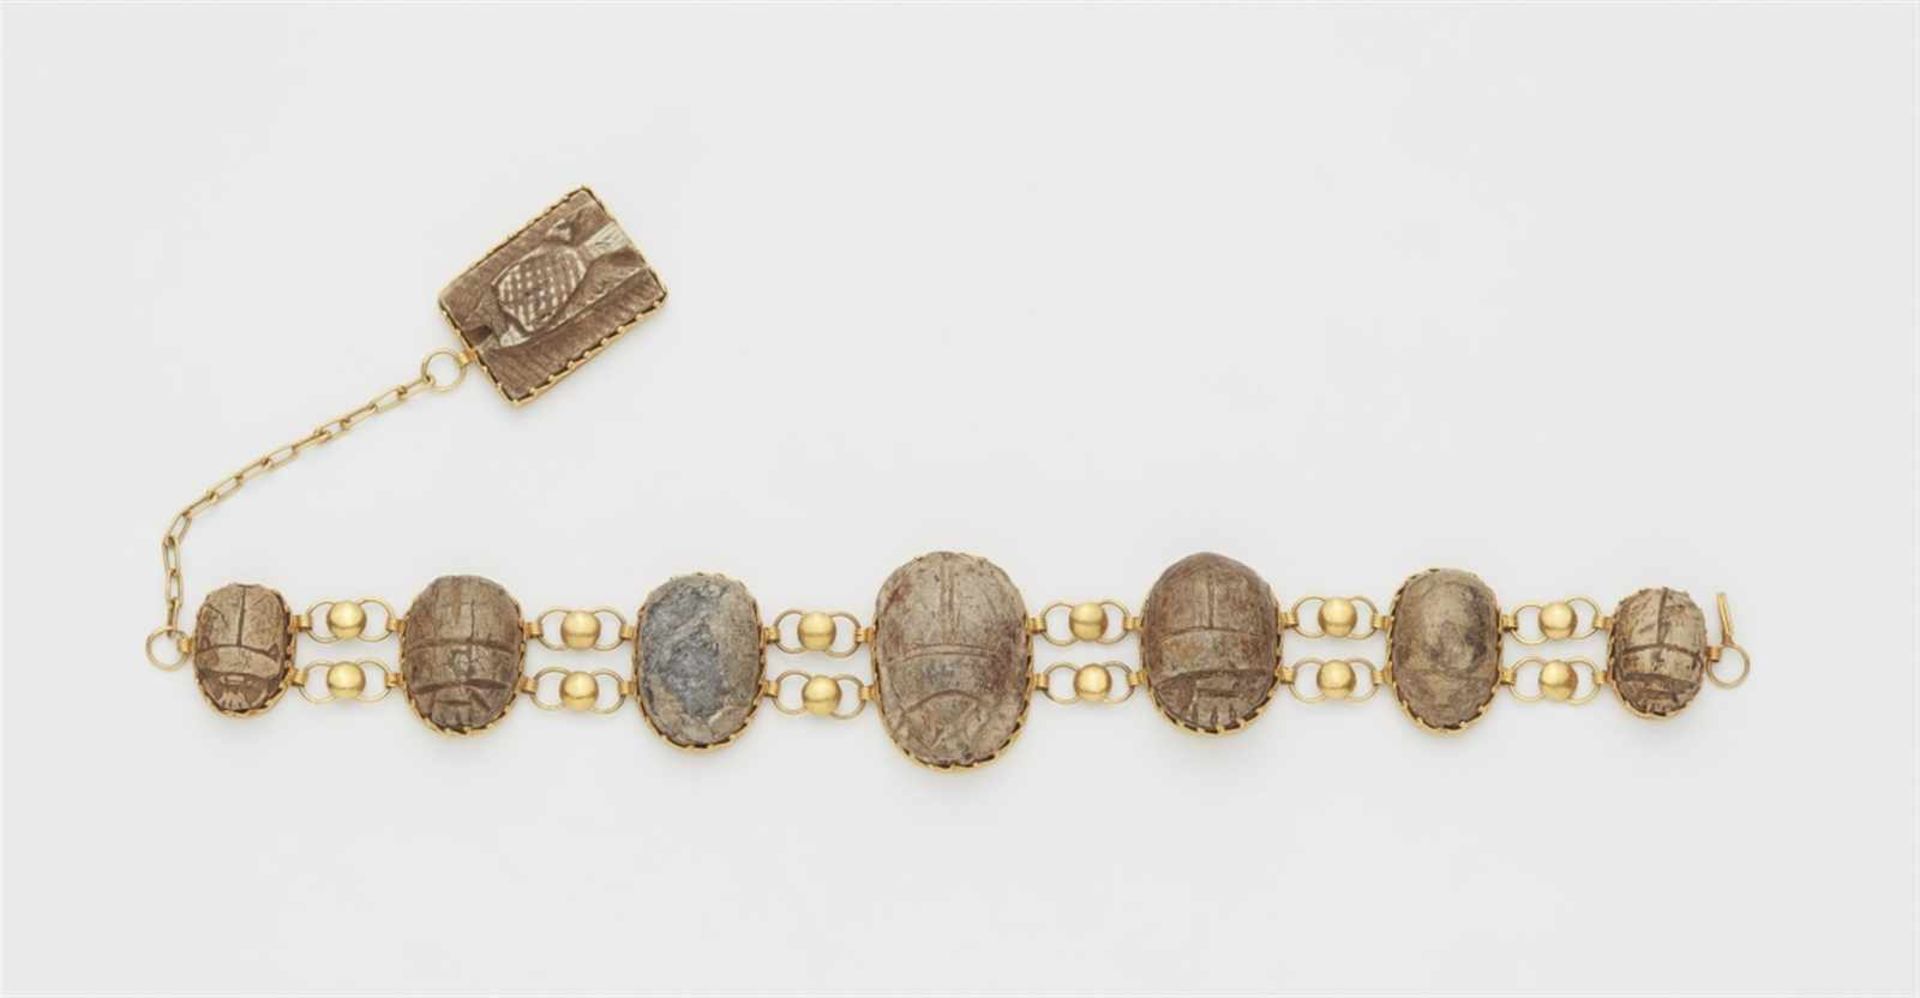 A 21k gold bracelet with scarab amuletsDesigned as a band of seven ancient Egyptian scarab beetle